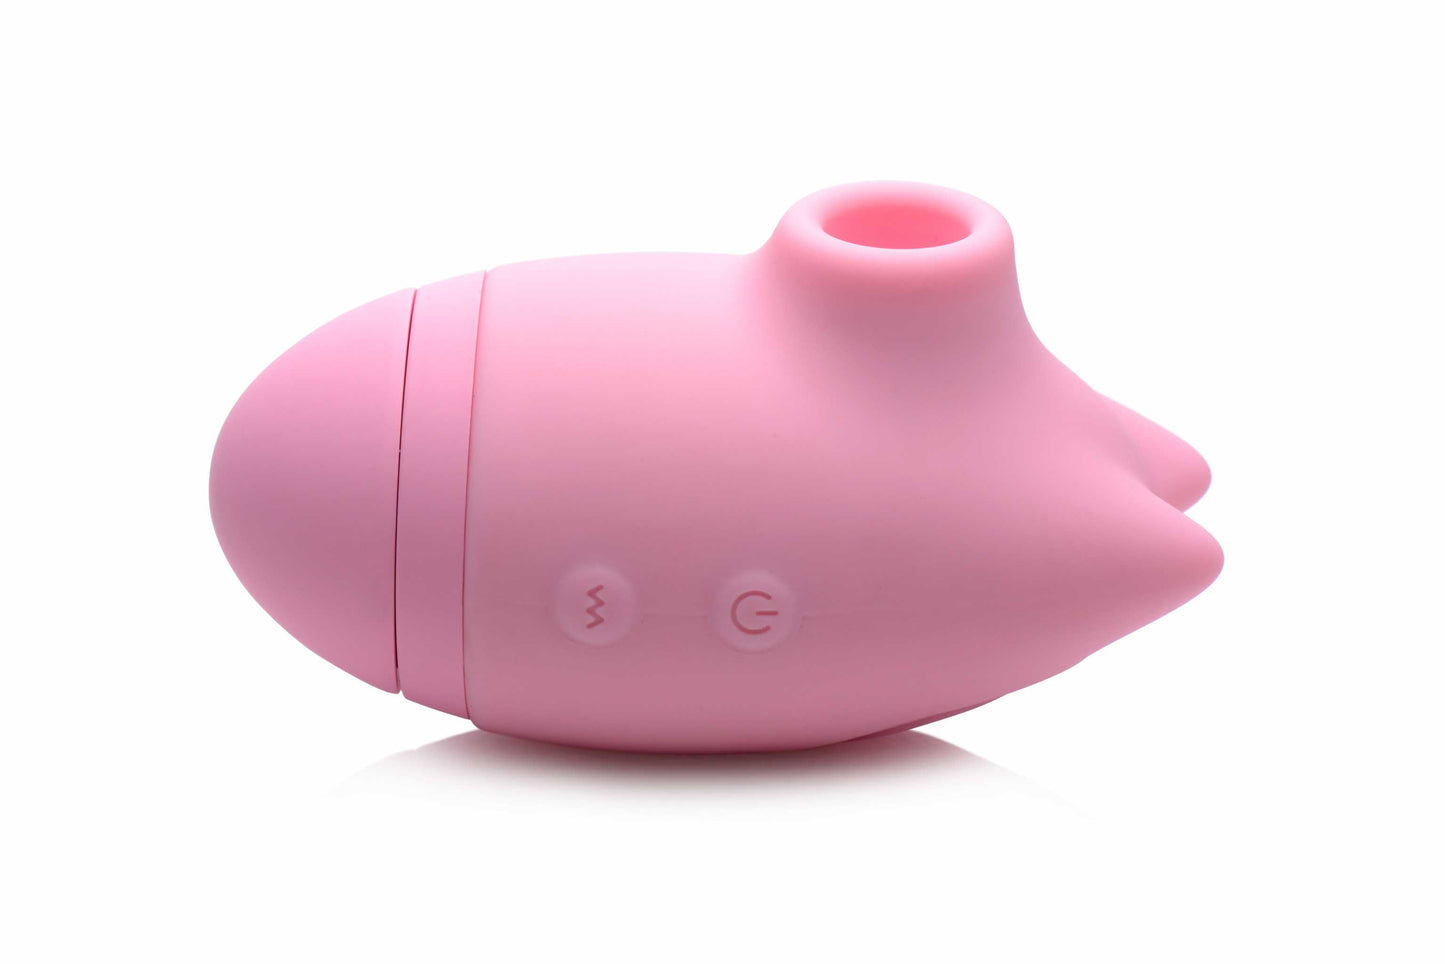 side view of the inmi shegasm kitty licker 5x silicone rechargeable clit stimulator pink xr-ag628